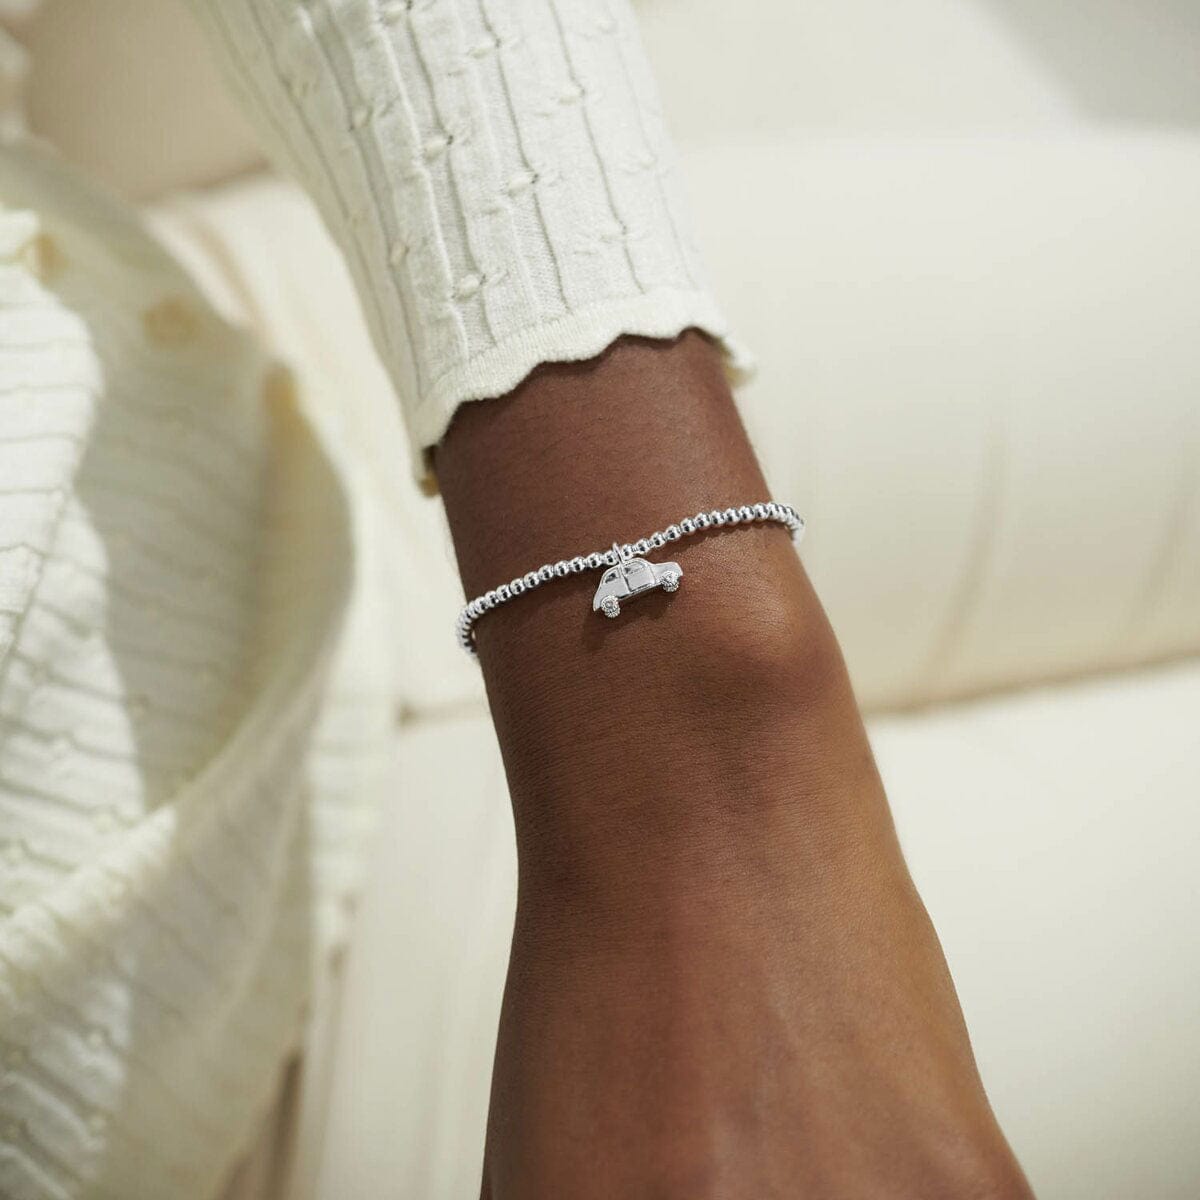 Joma Jewellery A Little Friendship Bracelet | A Little Means A Lot | A  Thoughtful Gift To Share With A Special Friend : Amazon.co.uk: Fashion